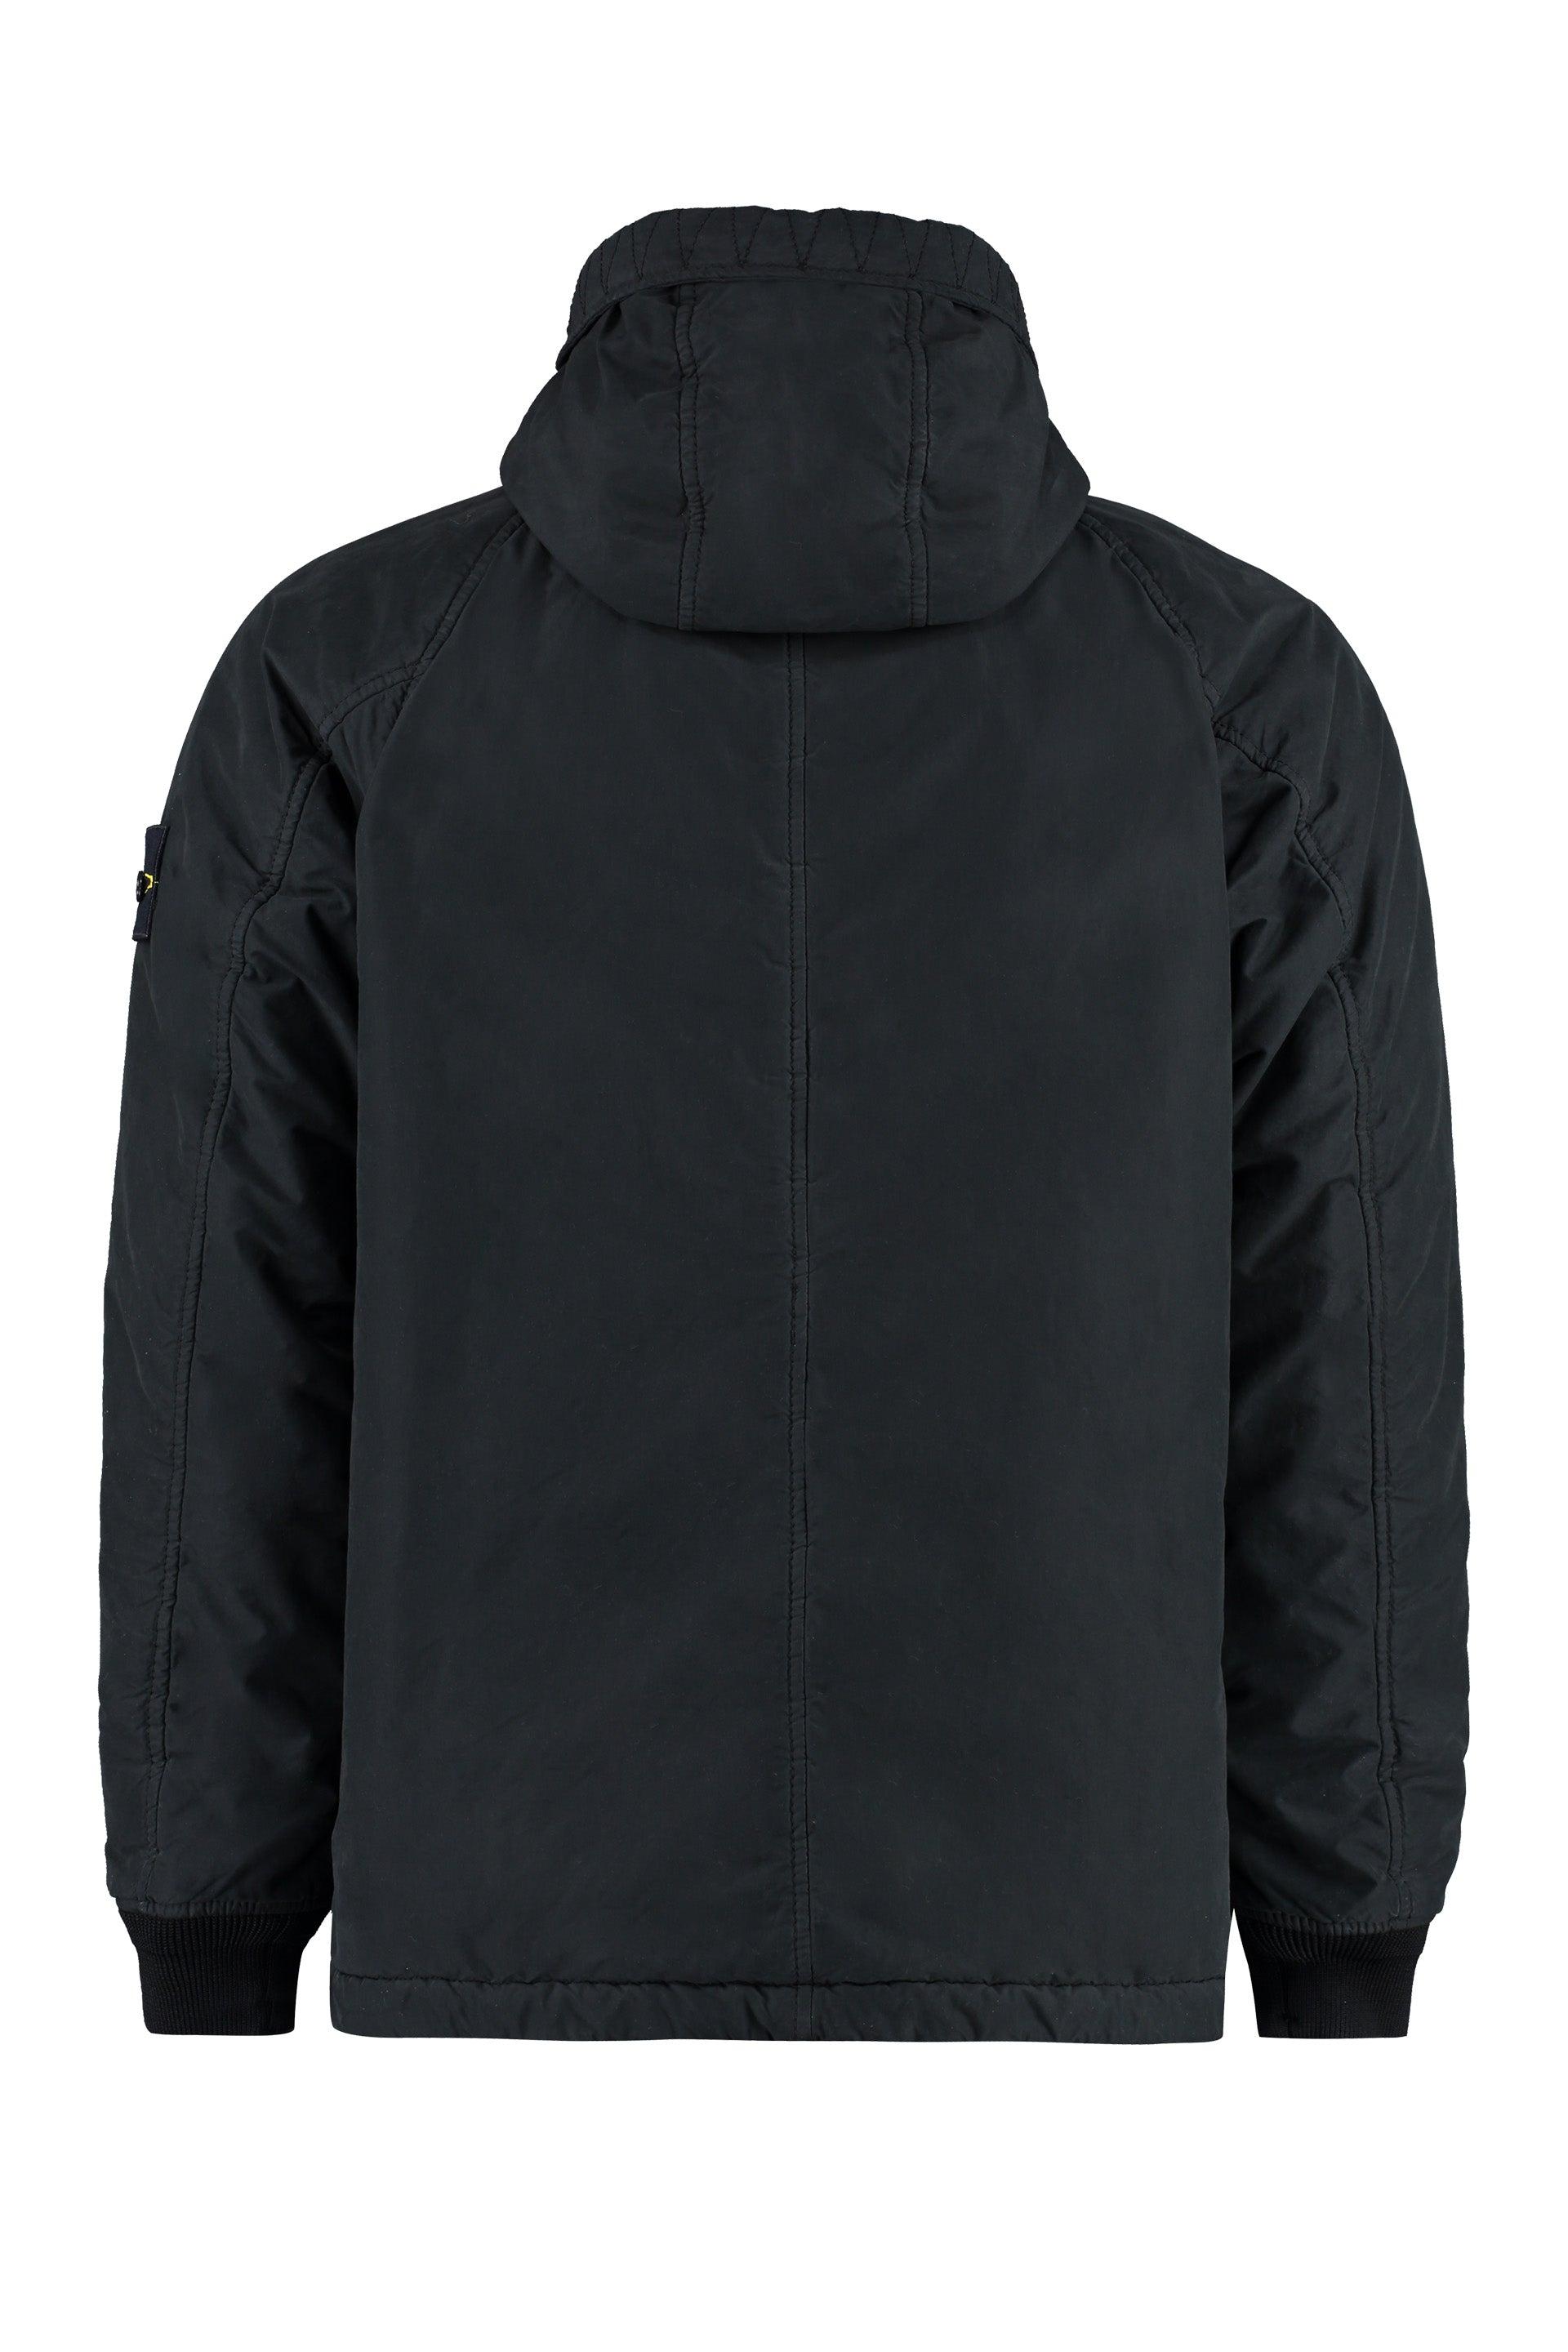 Stone Island Technical Fabric Hooded Jacket in Black for Men | Lyst